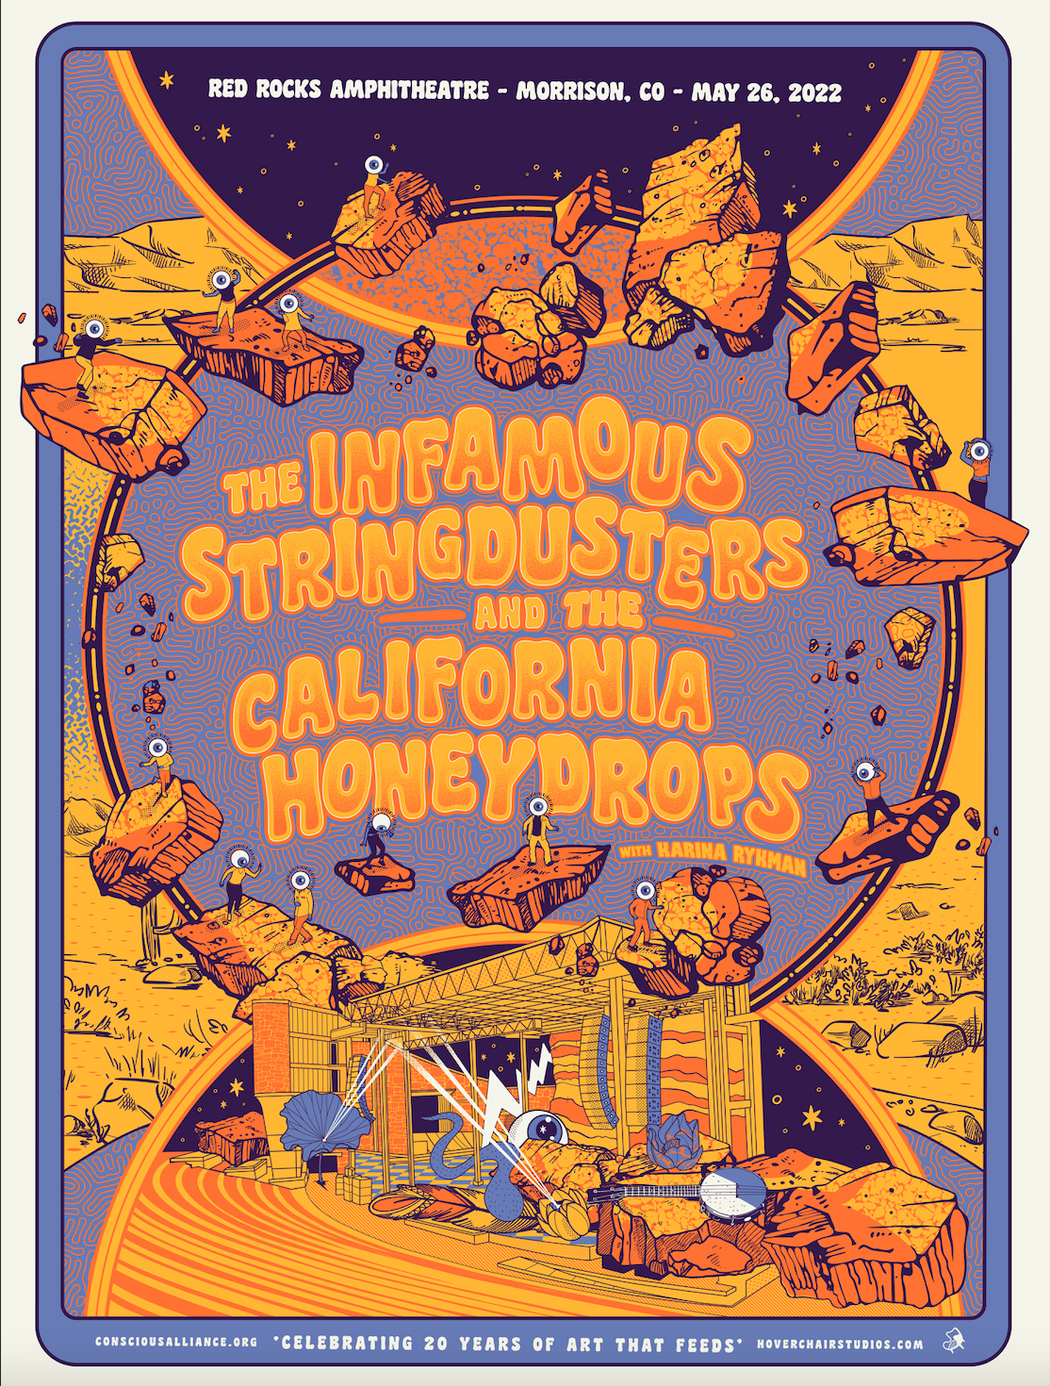 The Infamous Stringdusters & The California Honeydrops Morrison - 2022